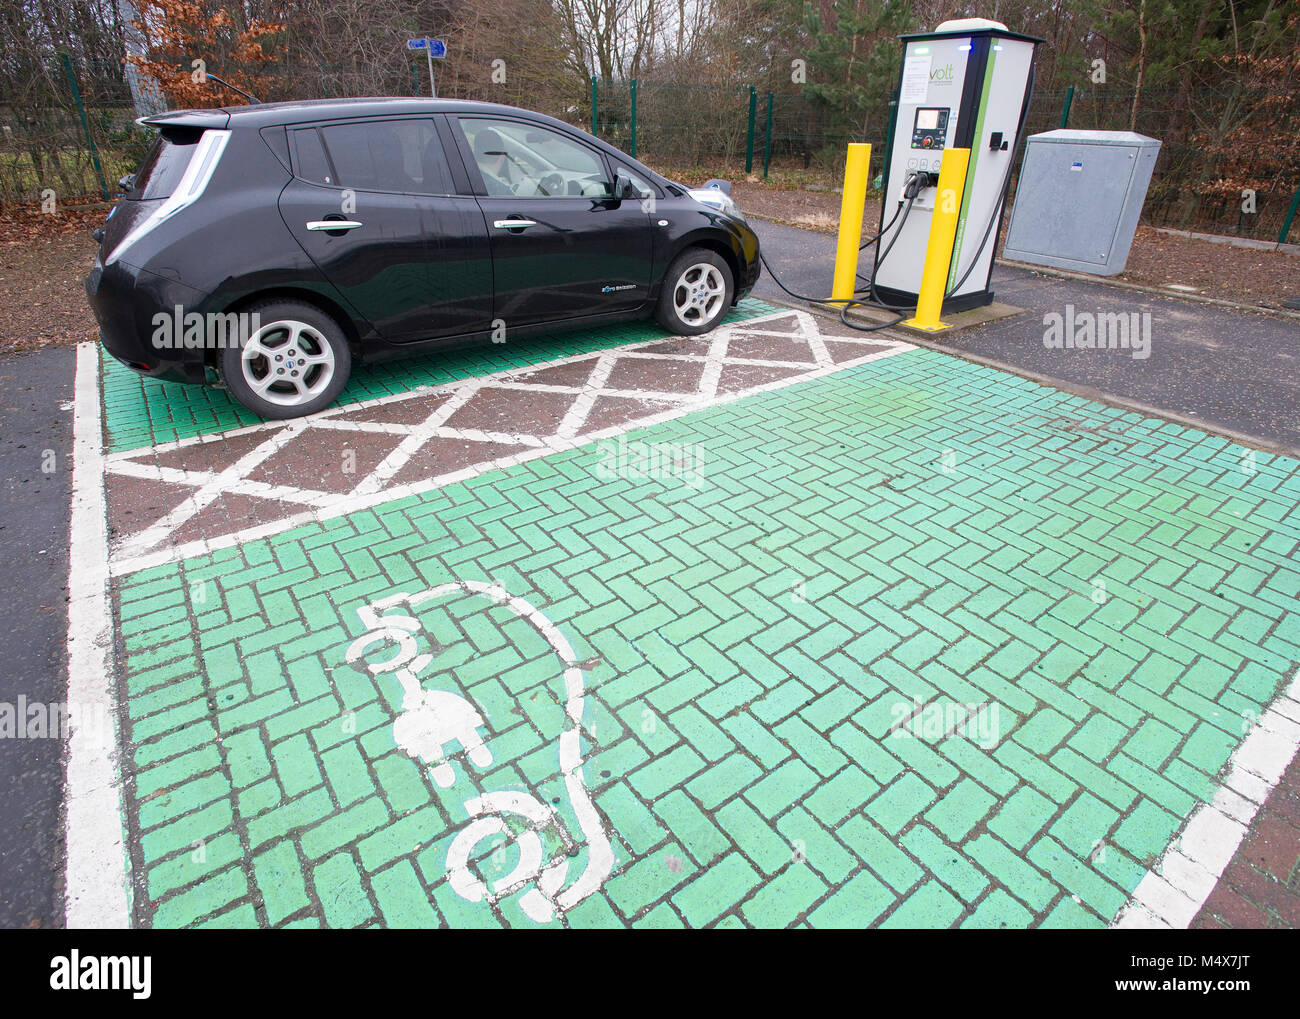 A Nissan Leaf electric car using a tri-rapid charger at a electric vehicle charging station, Riccarton, Edinburgh. Stock Photo